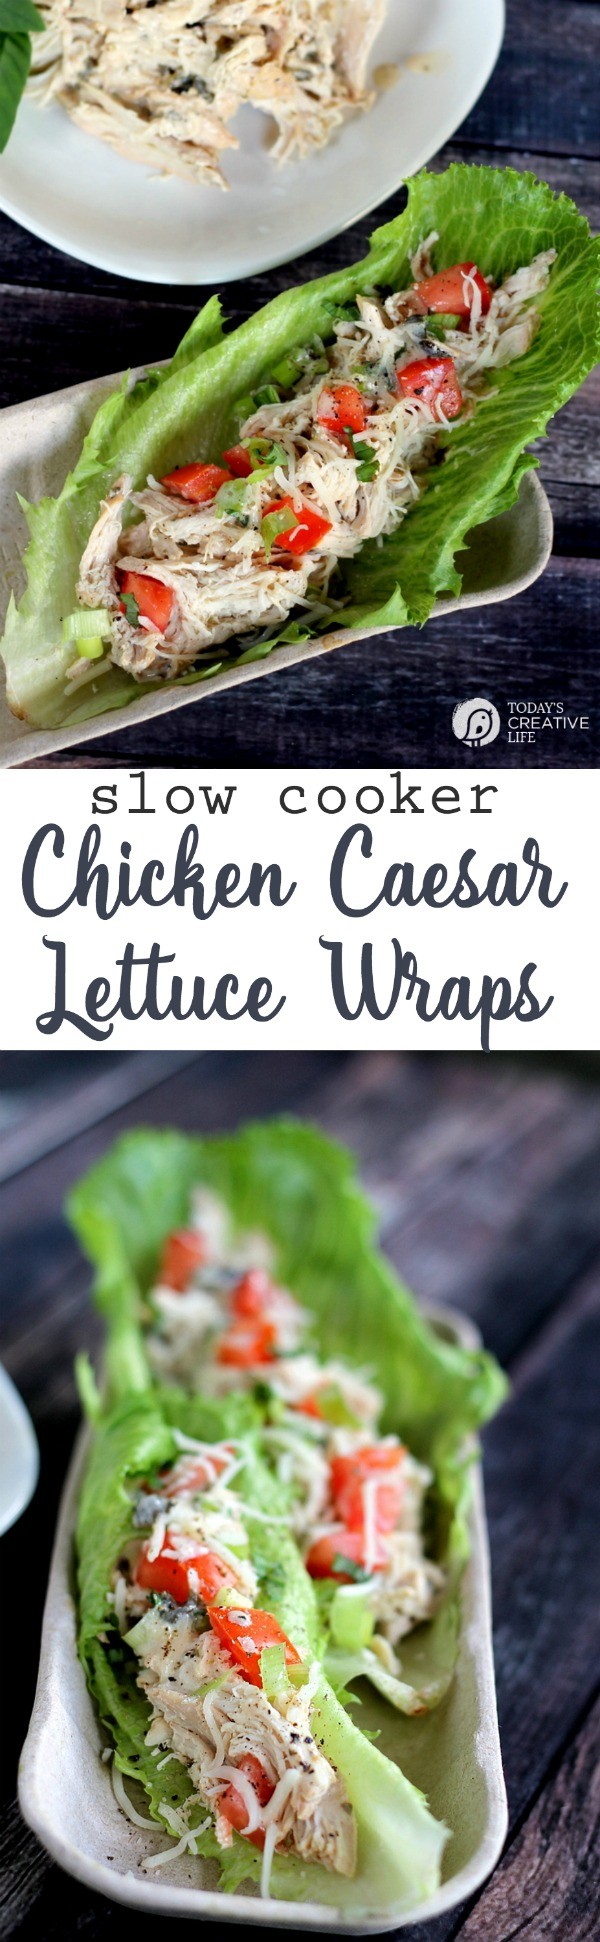 Chicken Lettuce Wraps | Slow Cooker Caesar Chicken Lettuce Wraps are just one of the many meals made with this slow cooker Caesar Chicken recipe. Click on the photo for the recipe. TodaysCreativeLife.com